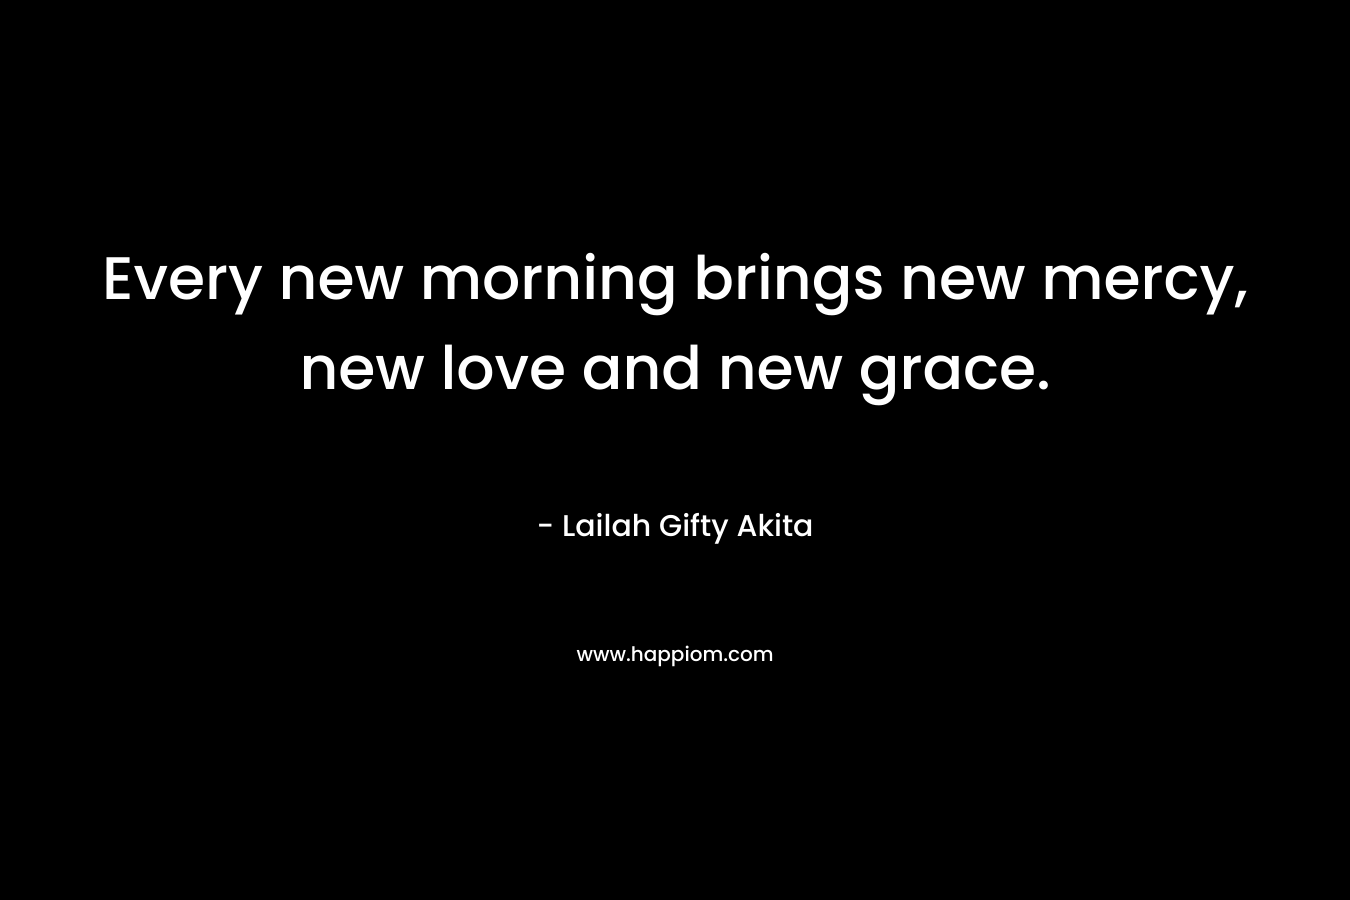 Every new morning brings new mercy, new love and new grace.